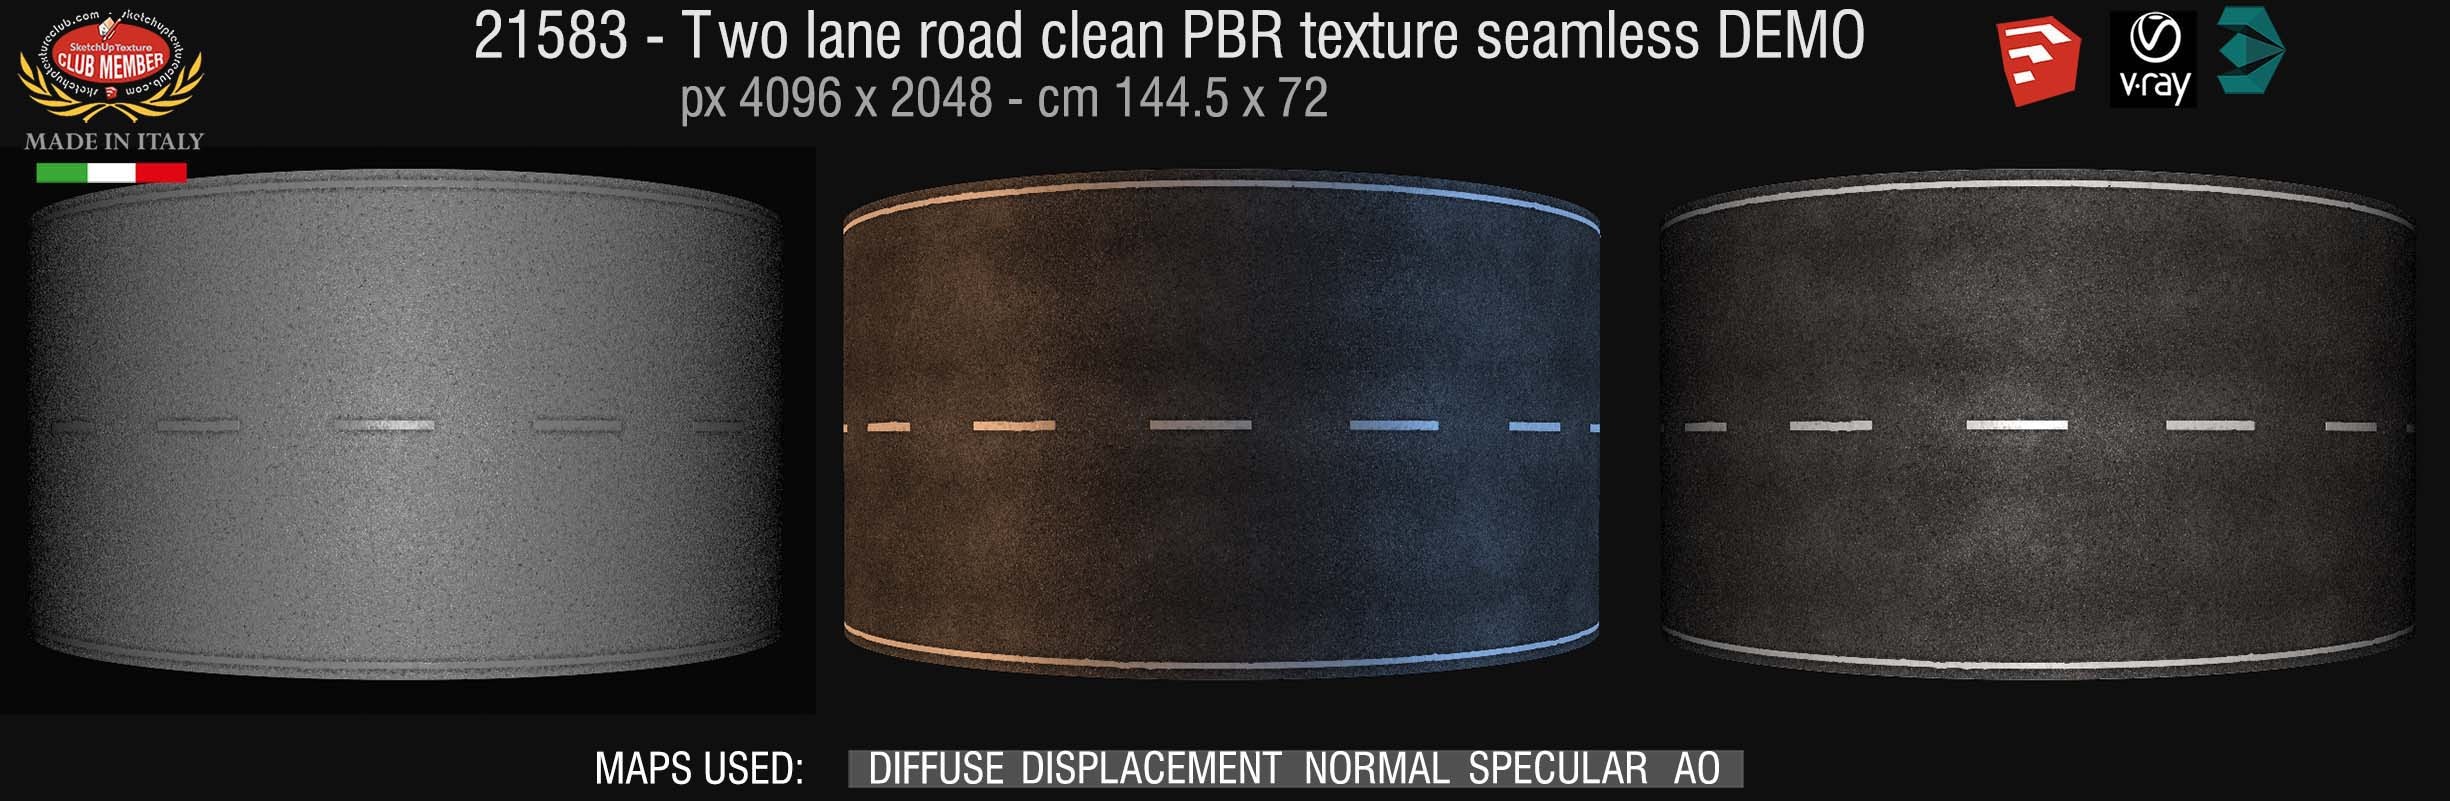 21583 Two lane road clean PRB texture seamless DEMO